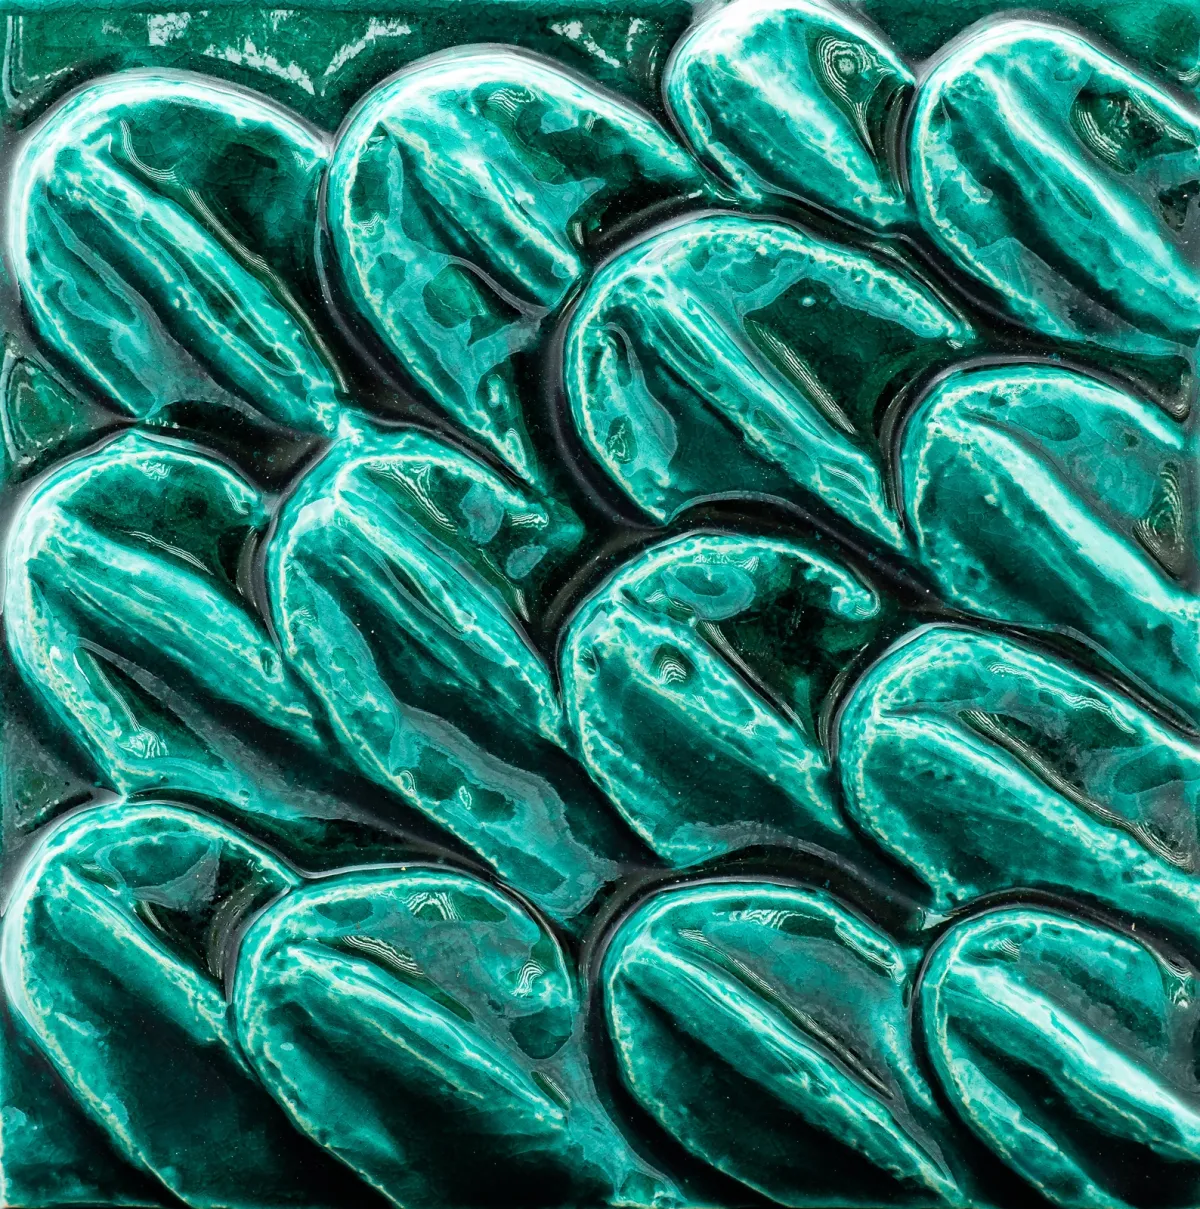 <h3>BS SEREIA VERDE BS 20x20</h3><small>Colections and Tiles, Bela Silva</small>